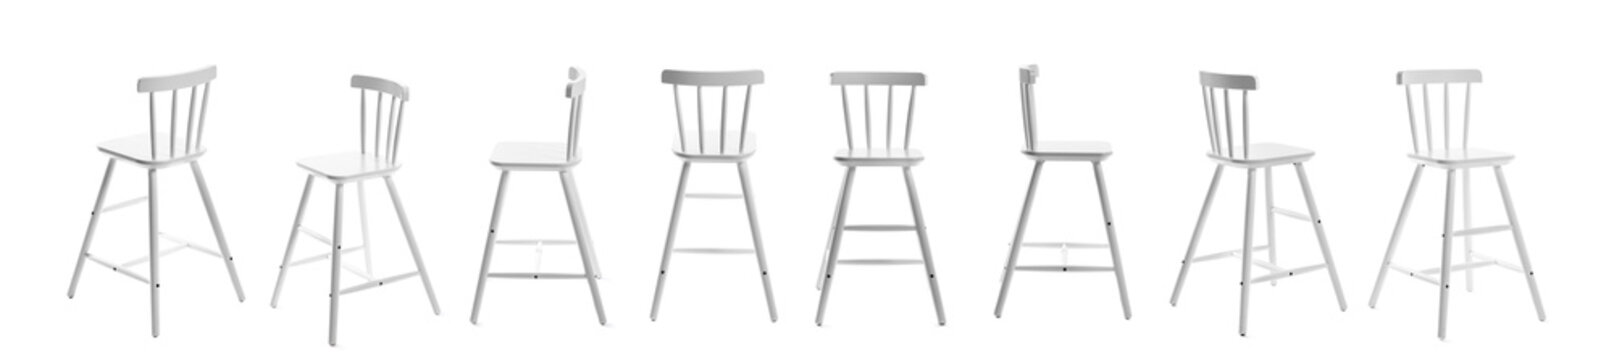 Set of high chair isolated on white, view from different angles